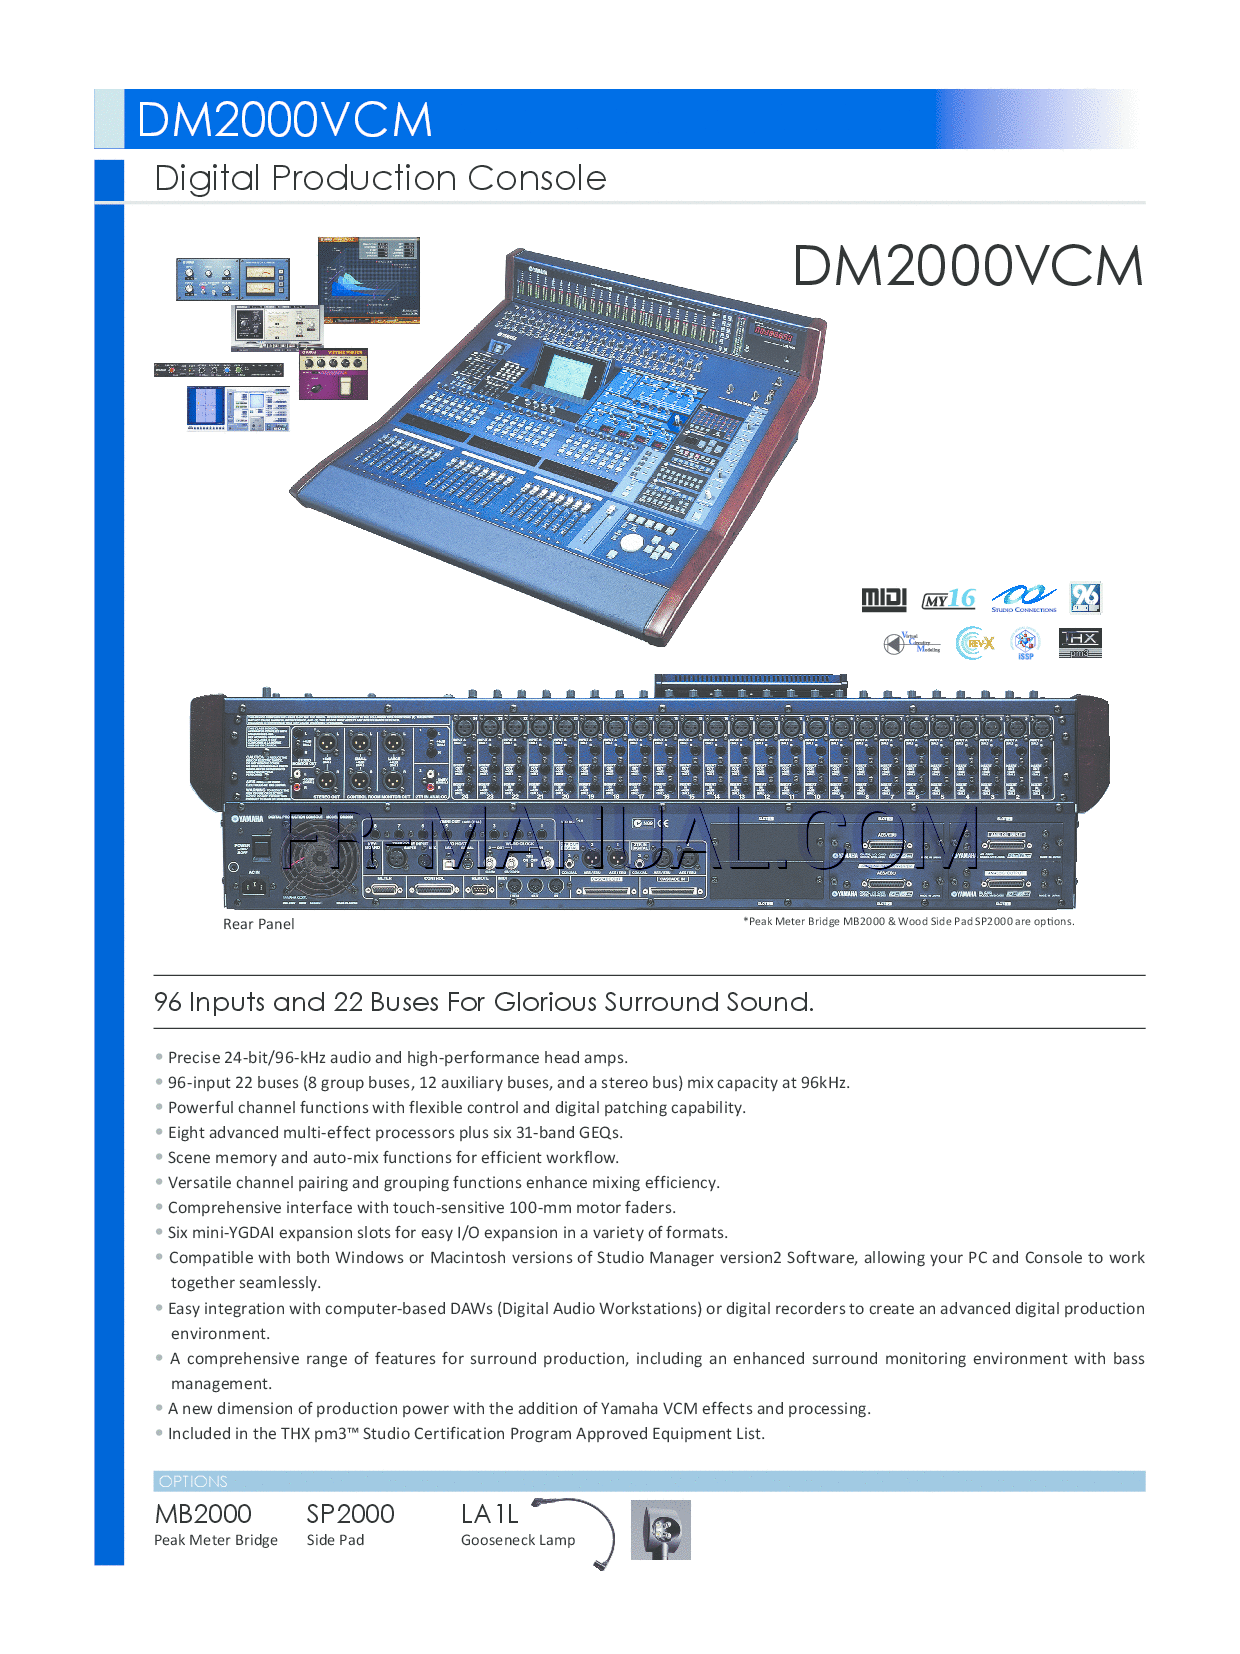 Read online Data Sheet for Yamaha DM2000VCM (Page 1)